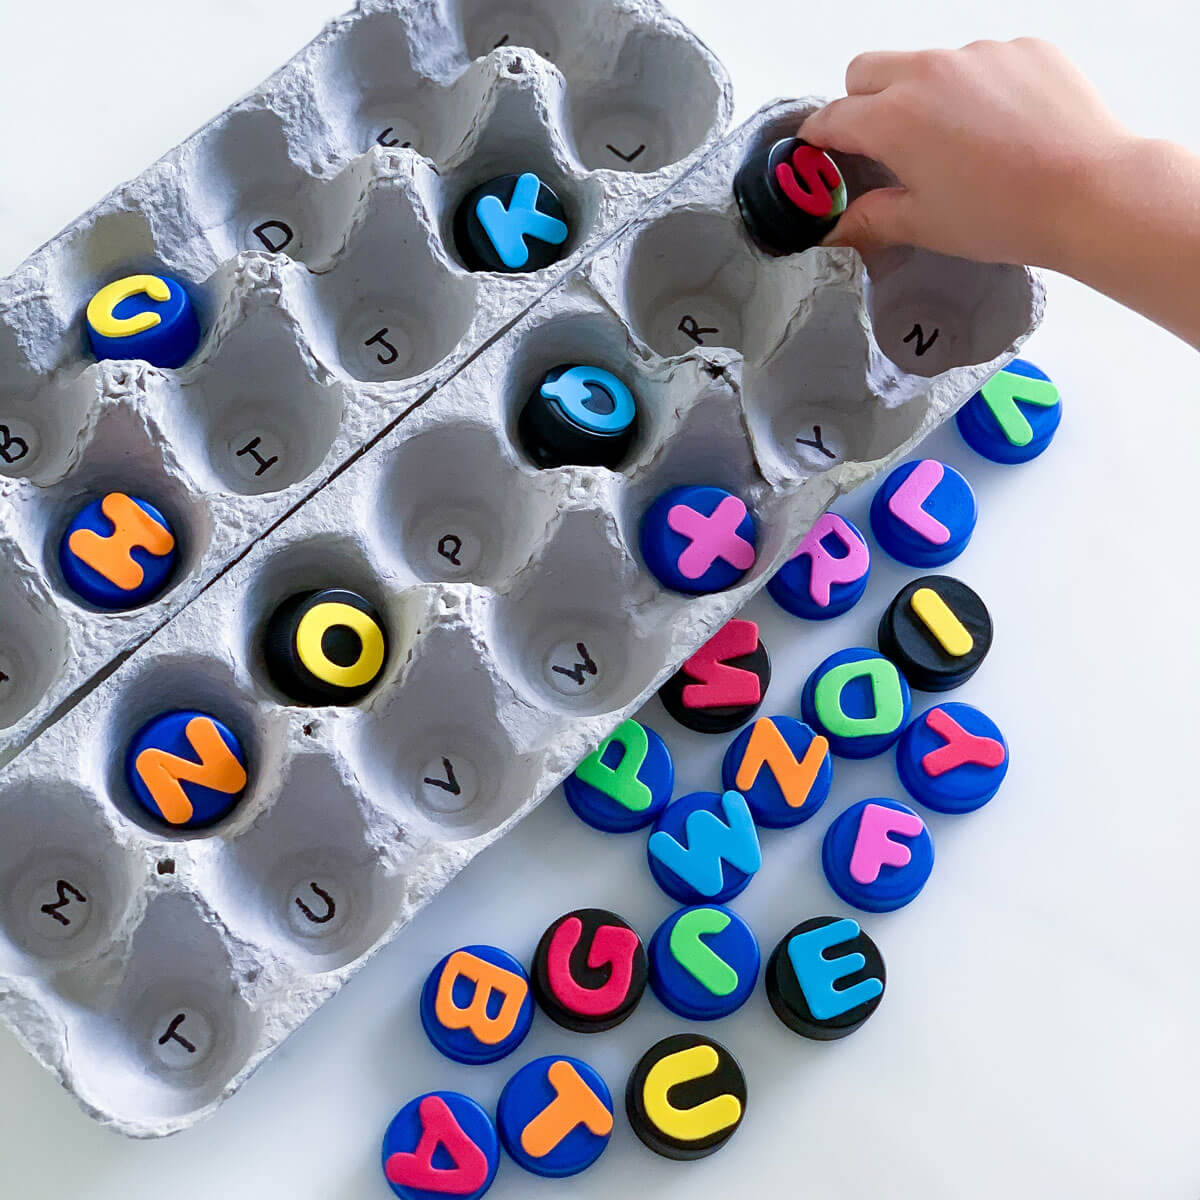 matching letter game using recycled egg carton bottle cap diy alphabet puzzle